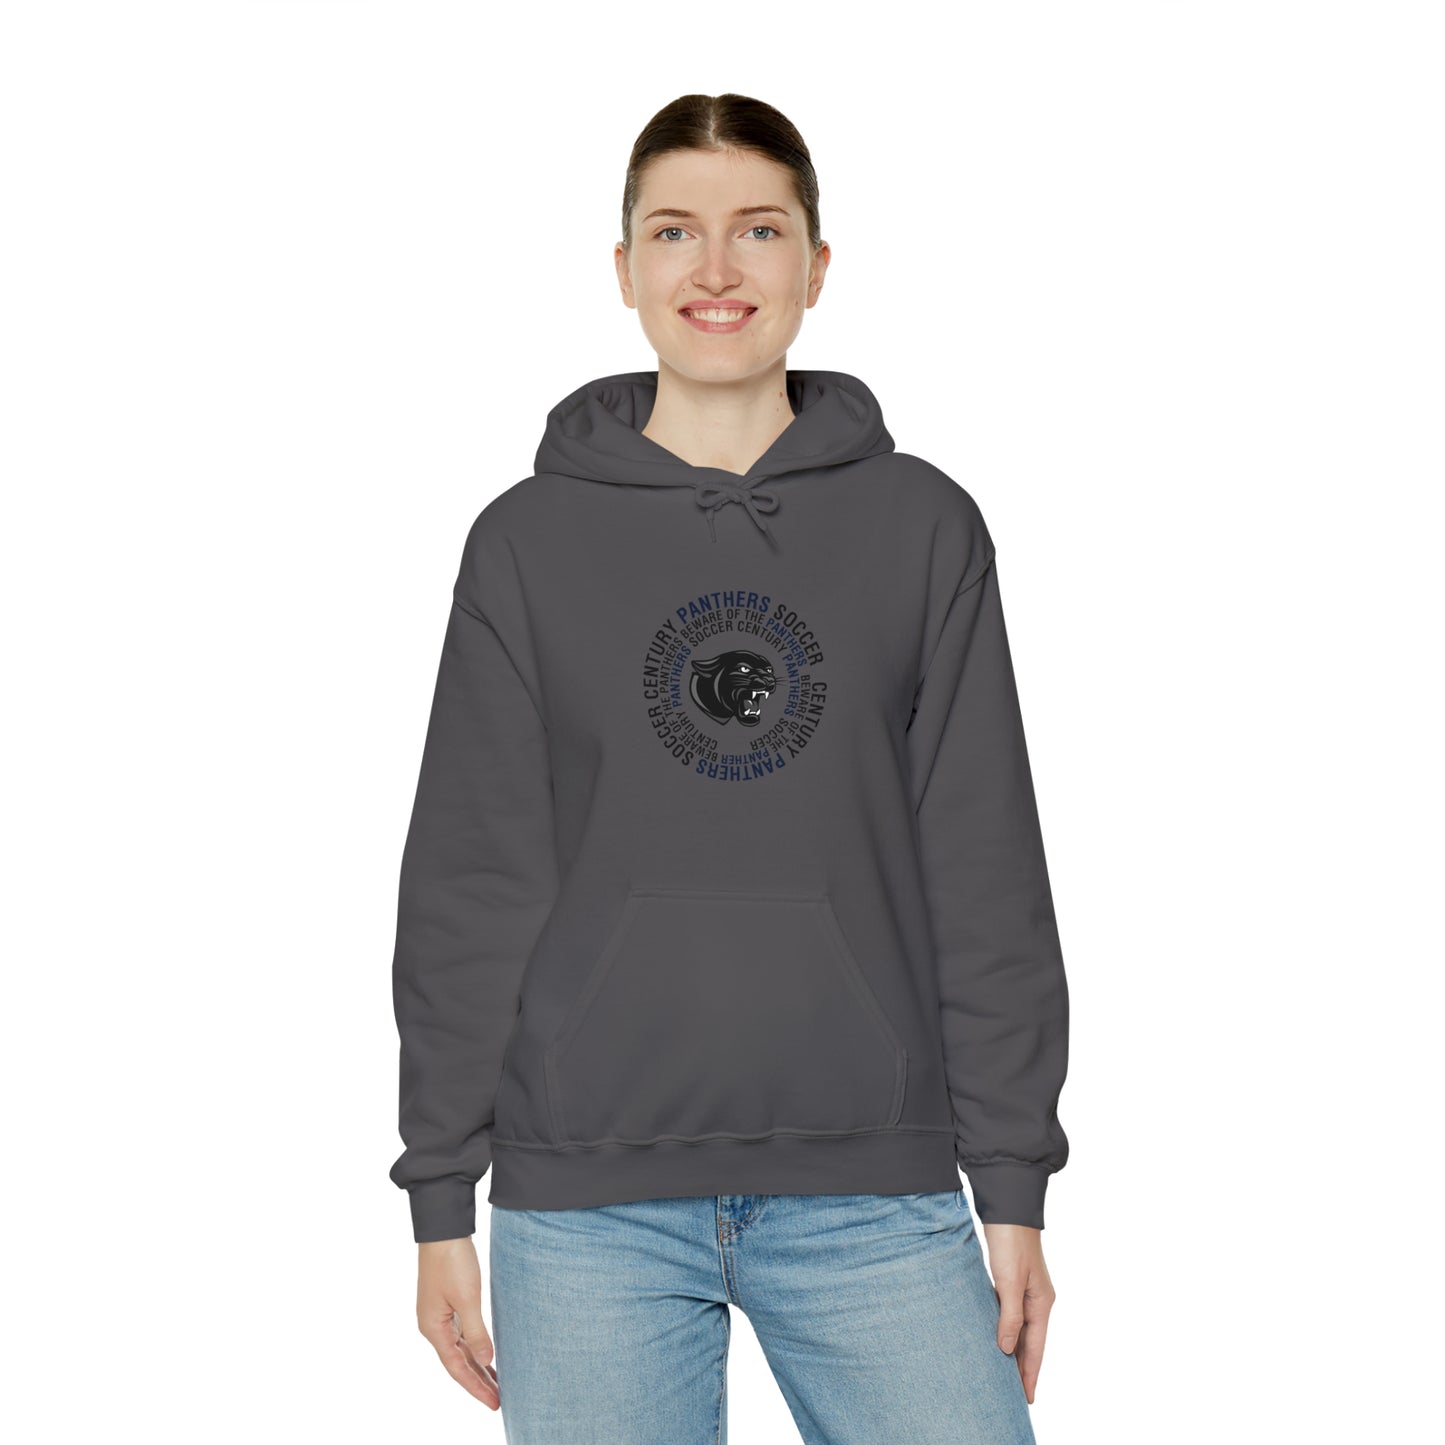 CENTURY SOCCER BEWARE THE PANTHER HOODIE